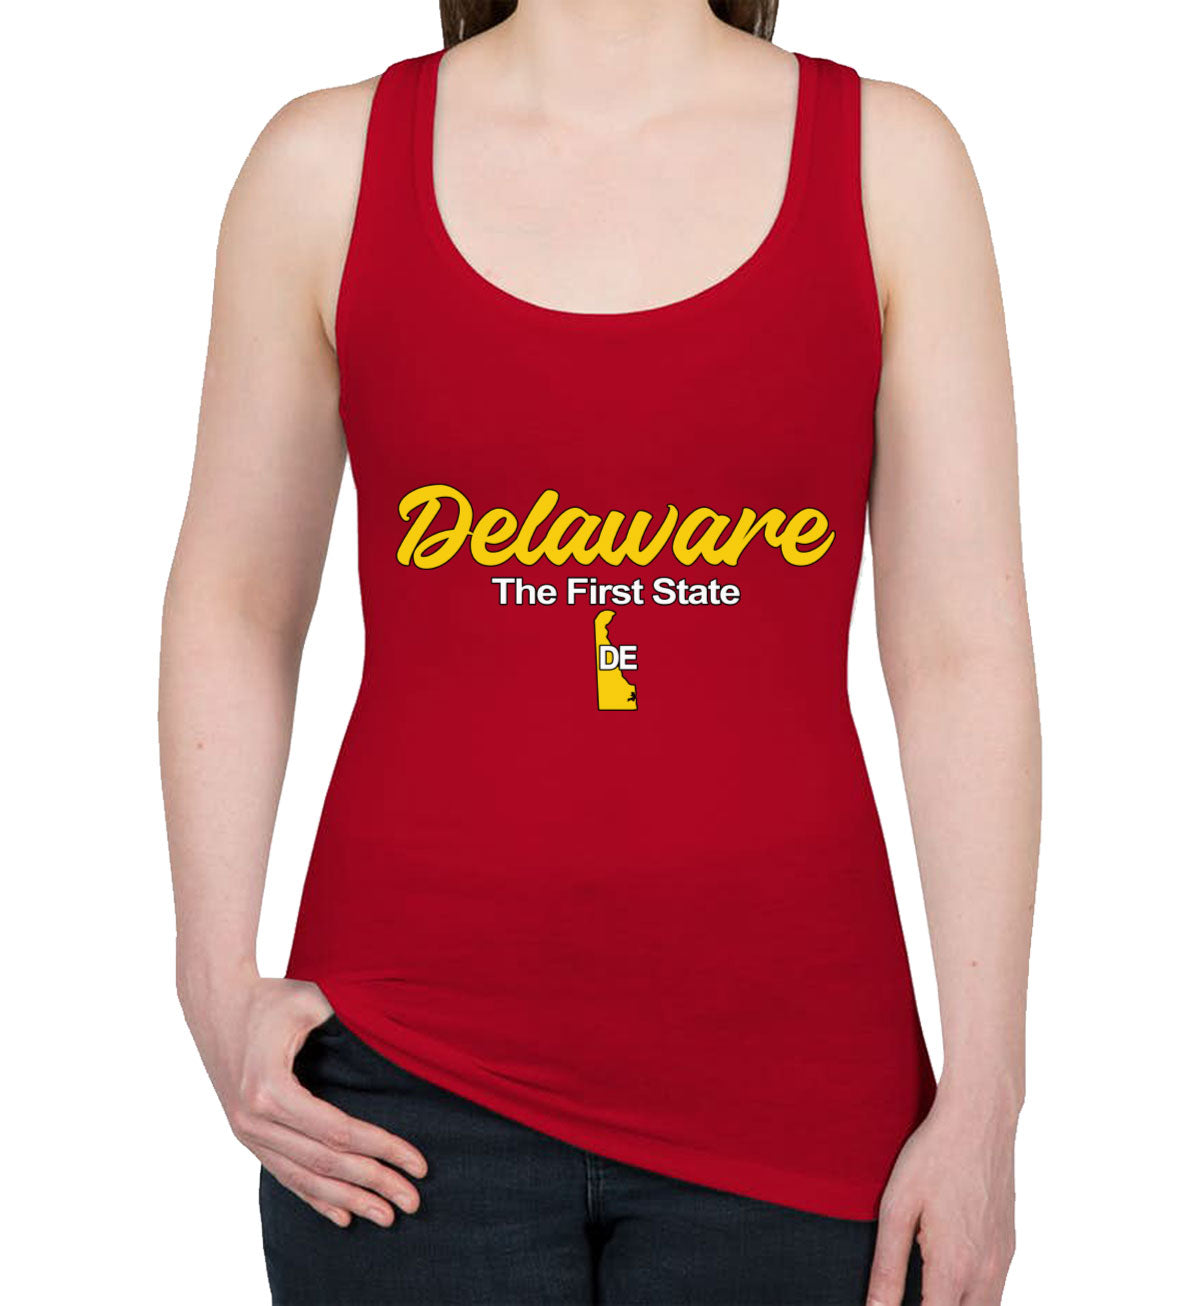 Delaware The First State Women's Racerback Tank Top